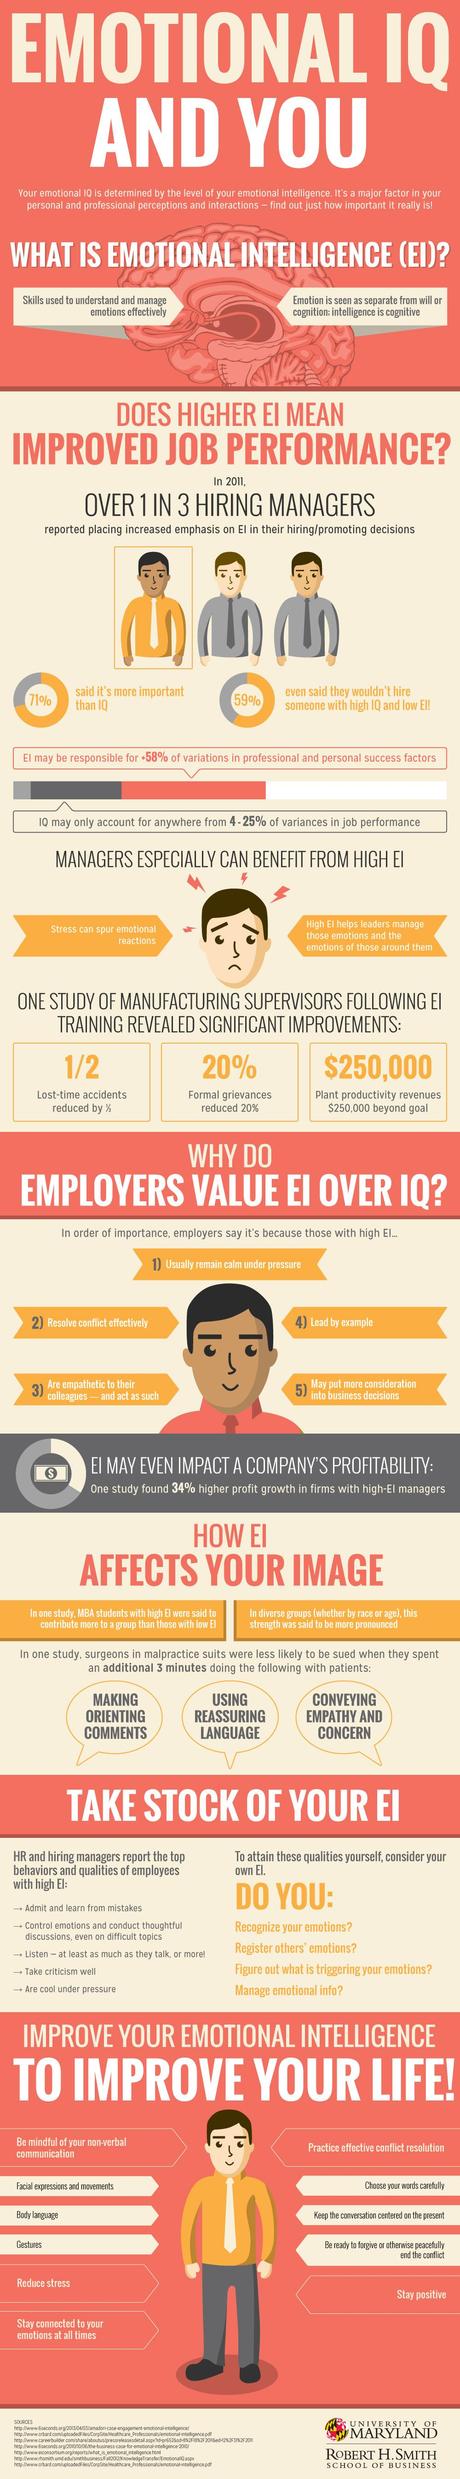 The-importance-of-Emotional-Intelligence-infographic